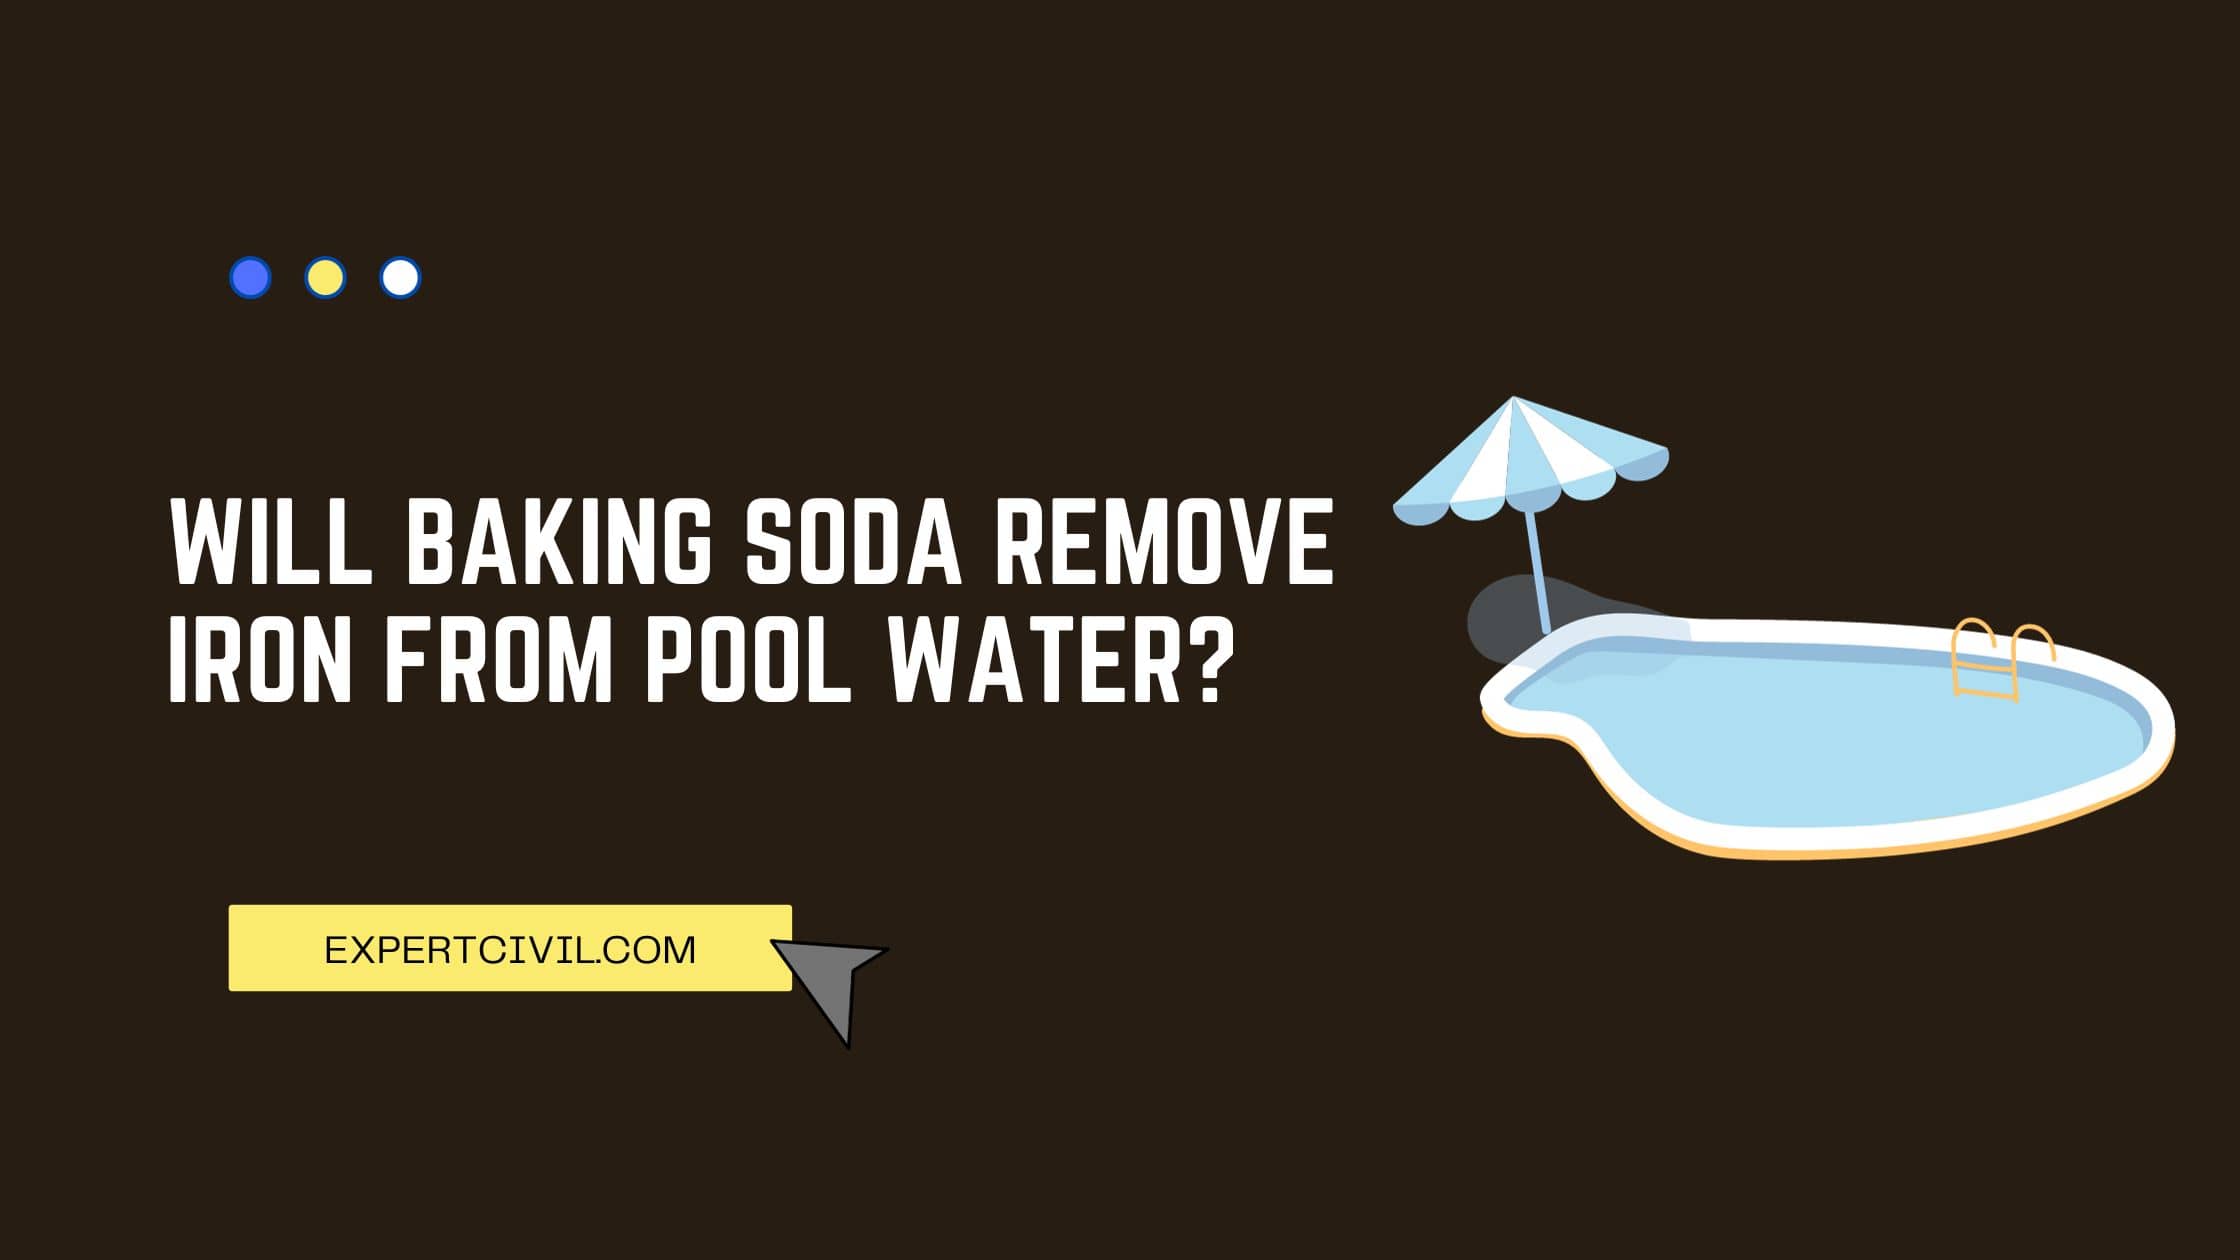 Will Baking Soda Remove Iron from Pool Water?